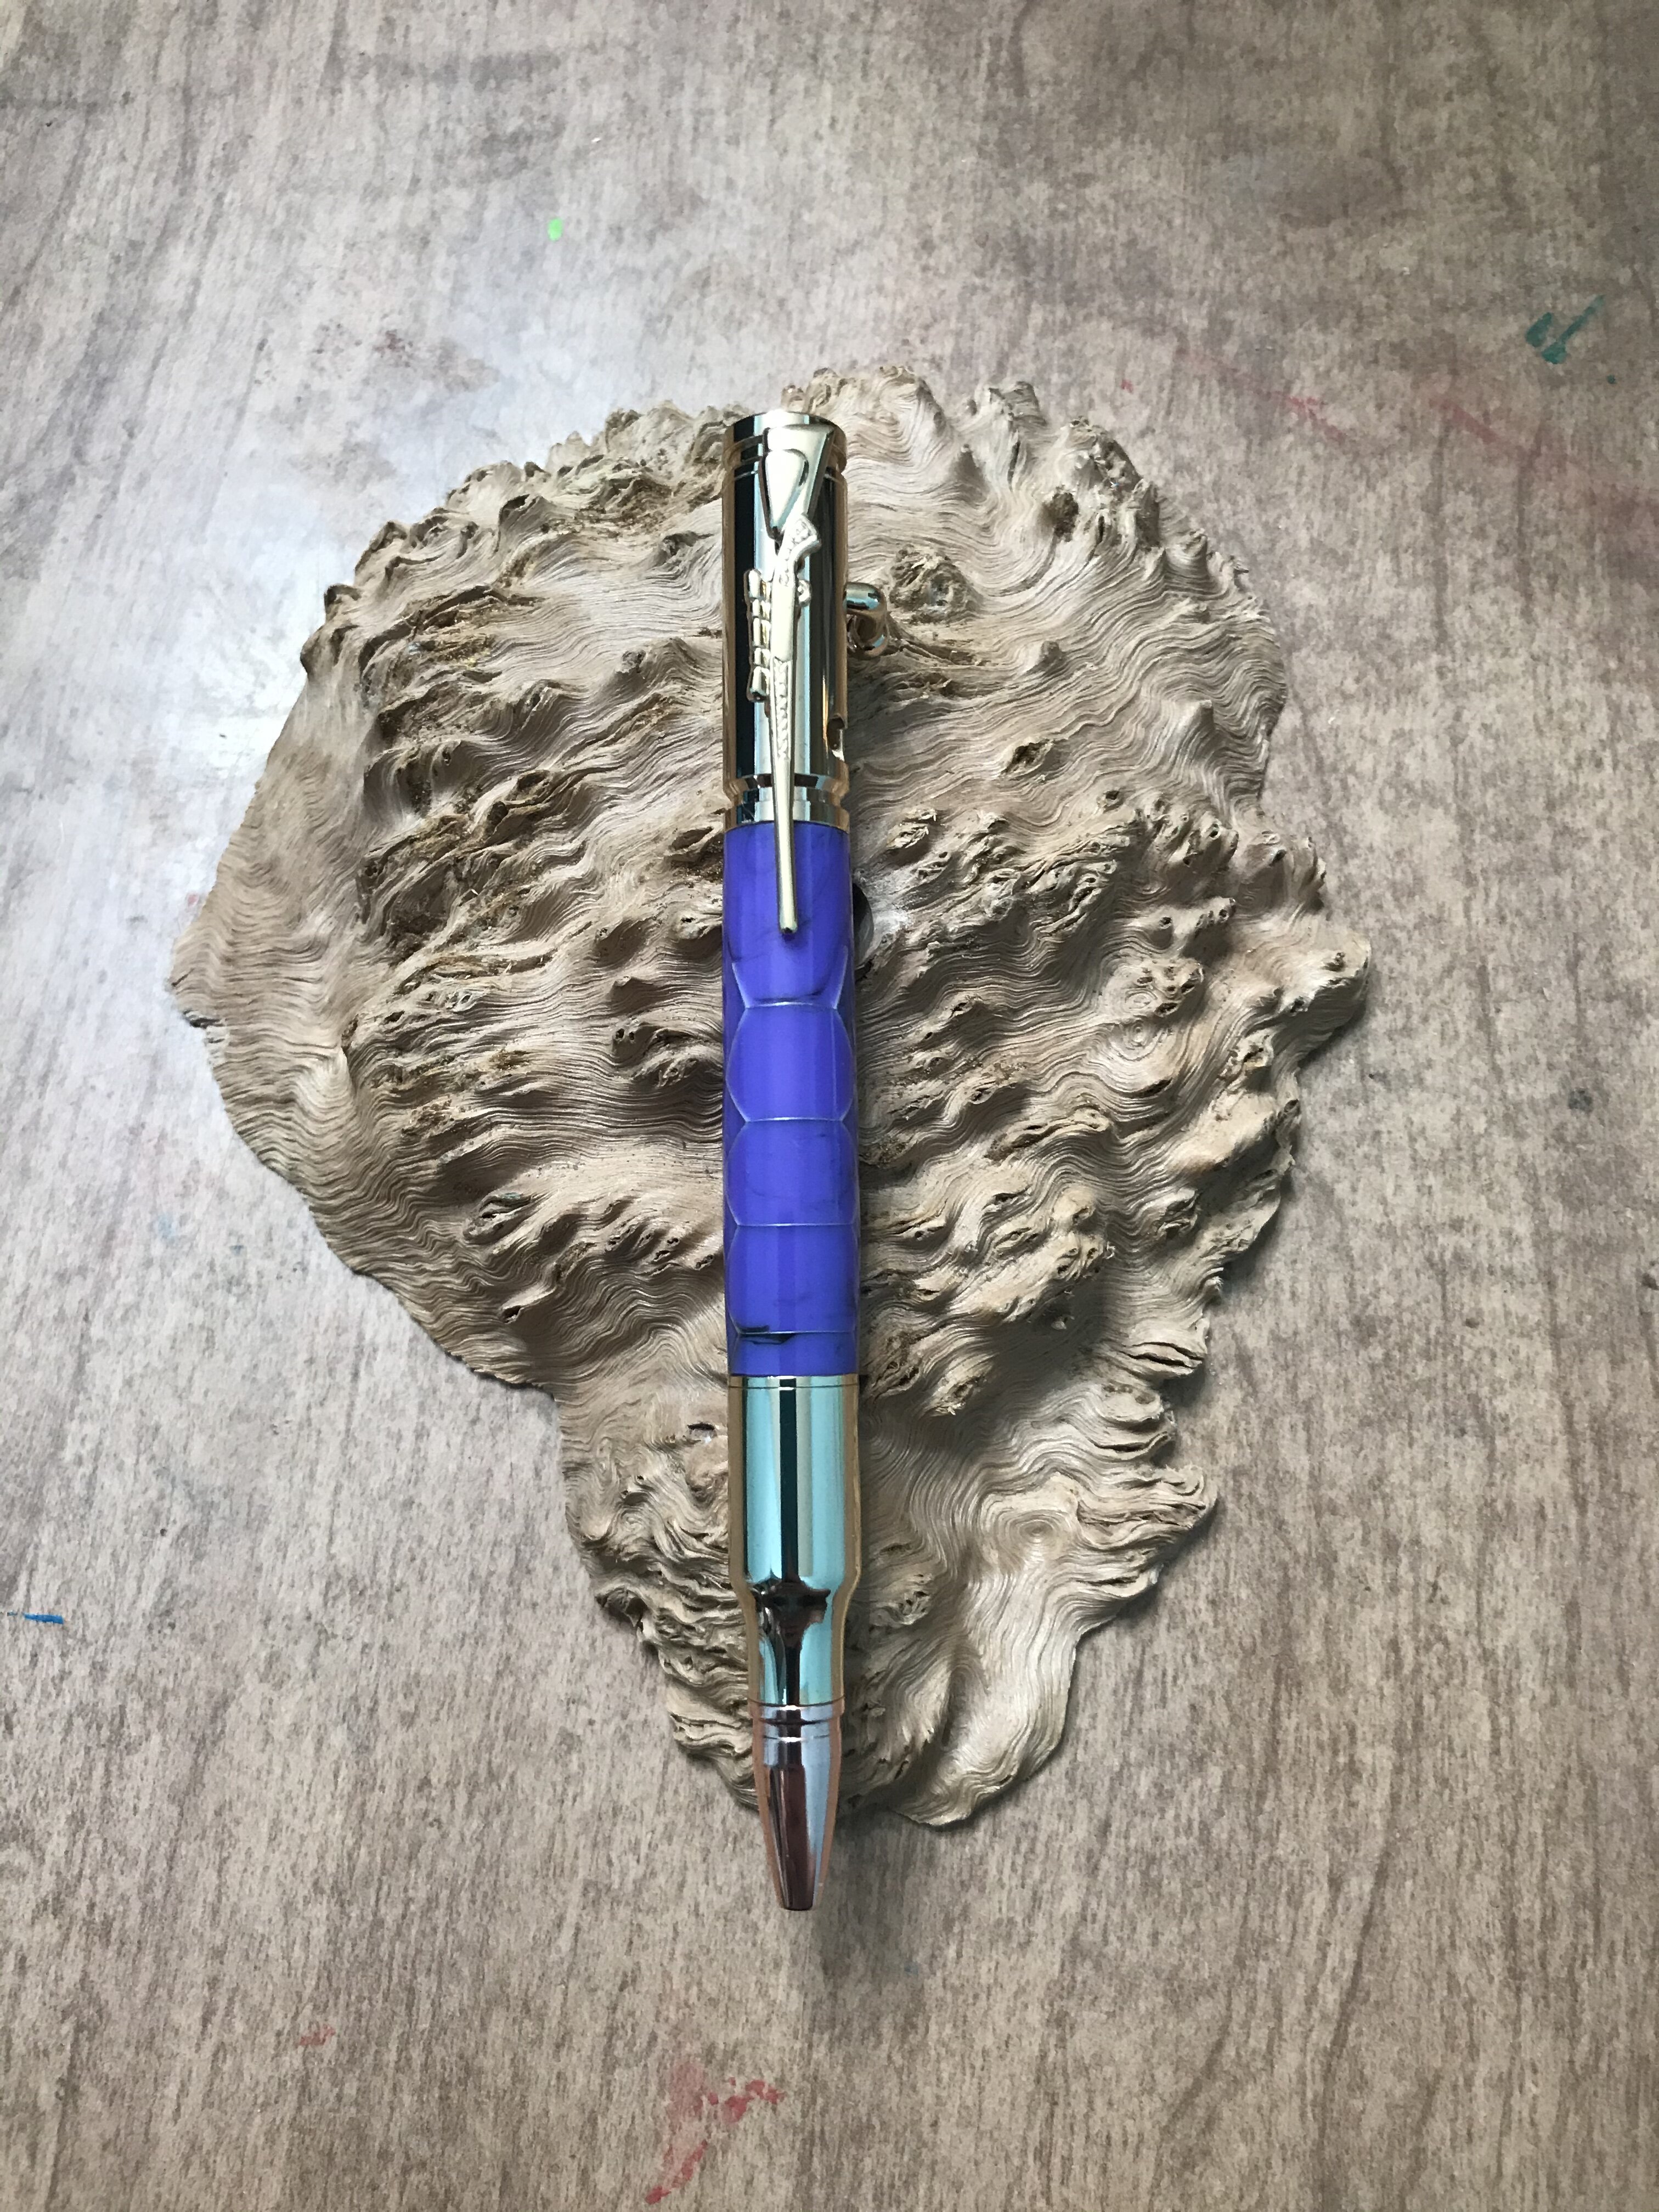 Purple Resin and Honeycomb on a 24K Gold .30 Cal Bullet Bolt Action